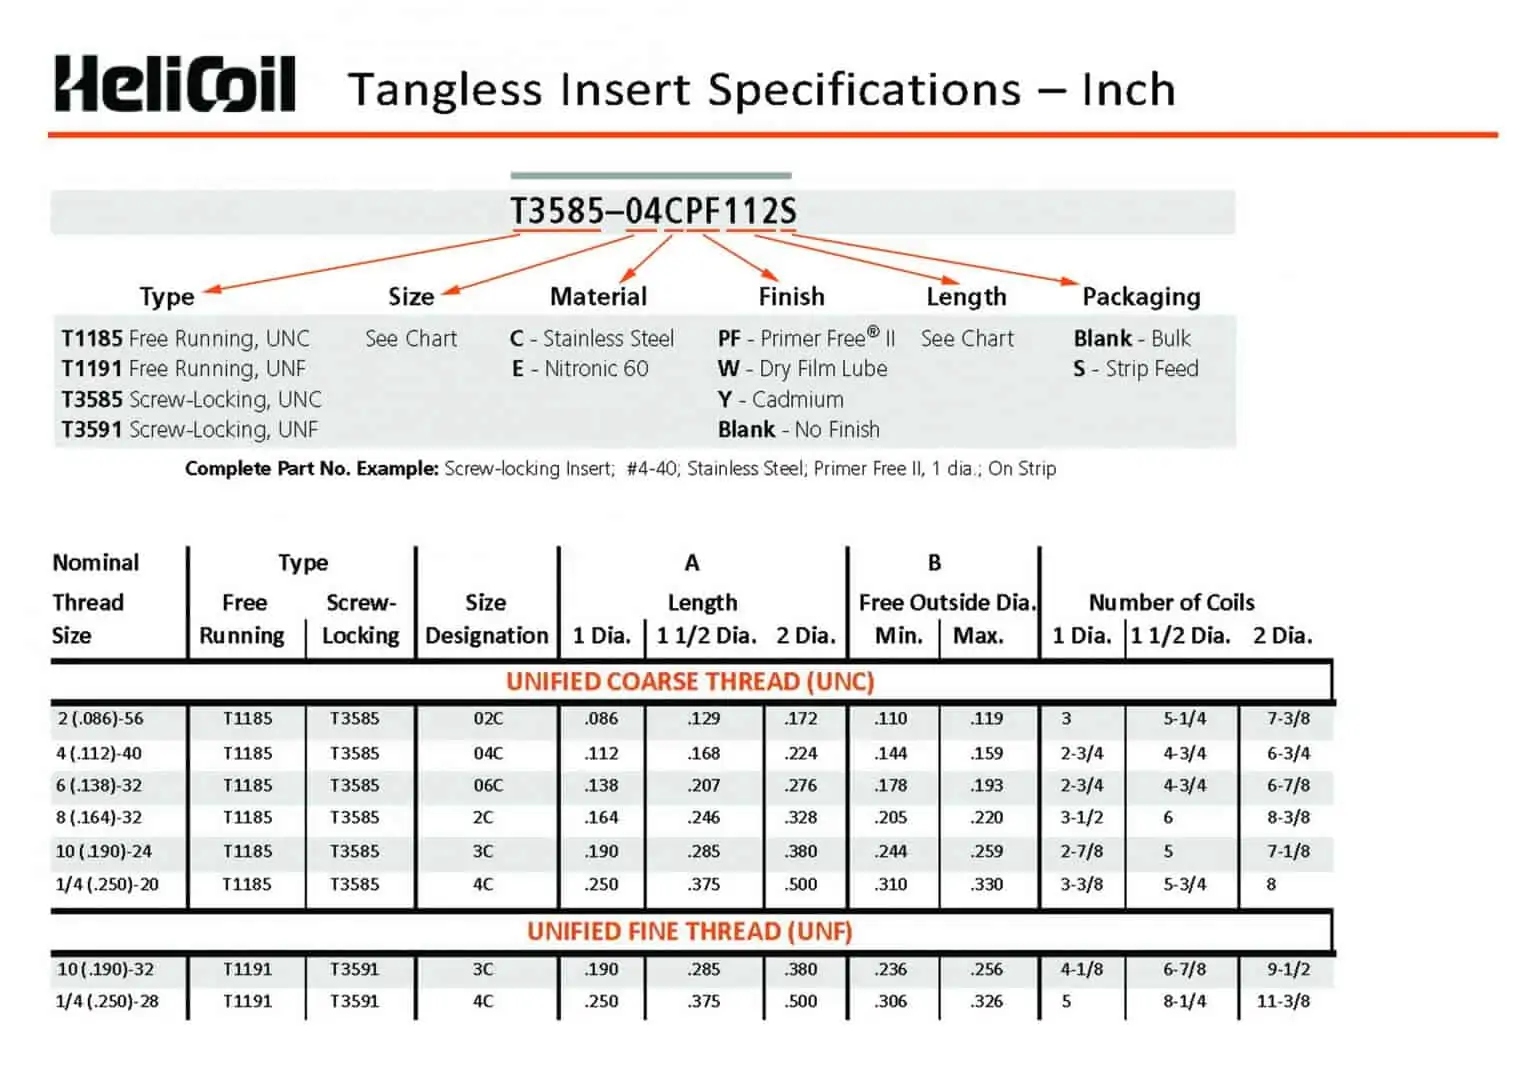 HeliCoil Catalog for HeliCoil Sizes & HeliCoil Thread Repair - Tangless Insert Specs Inch